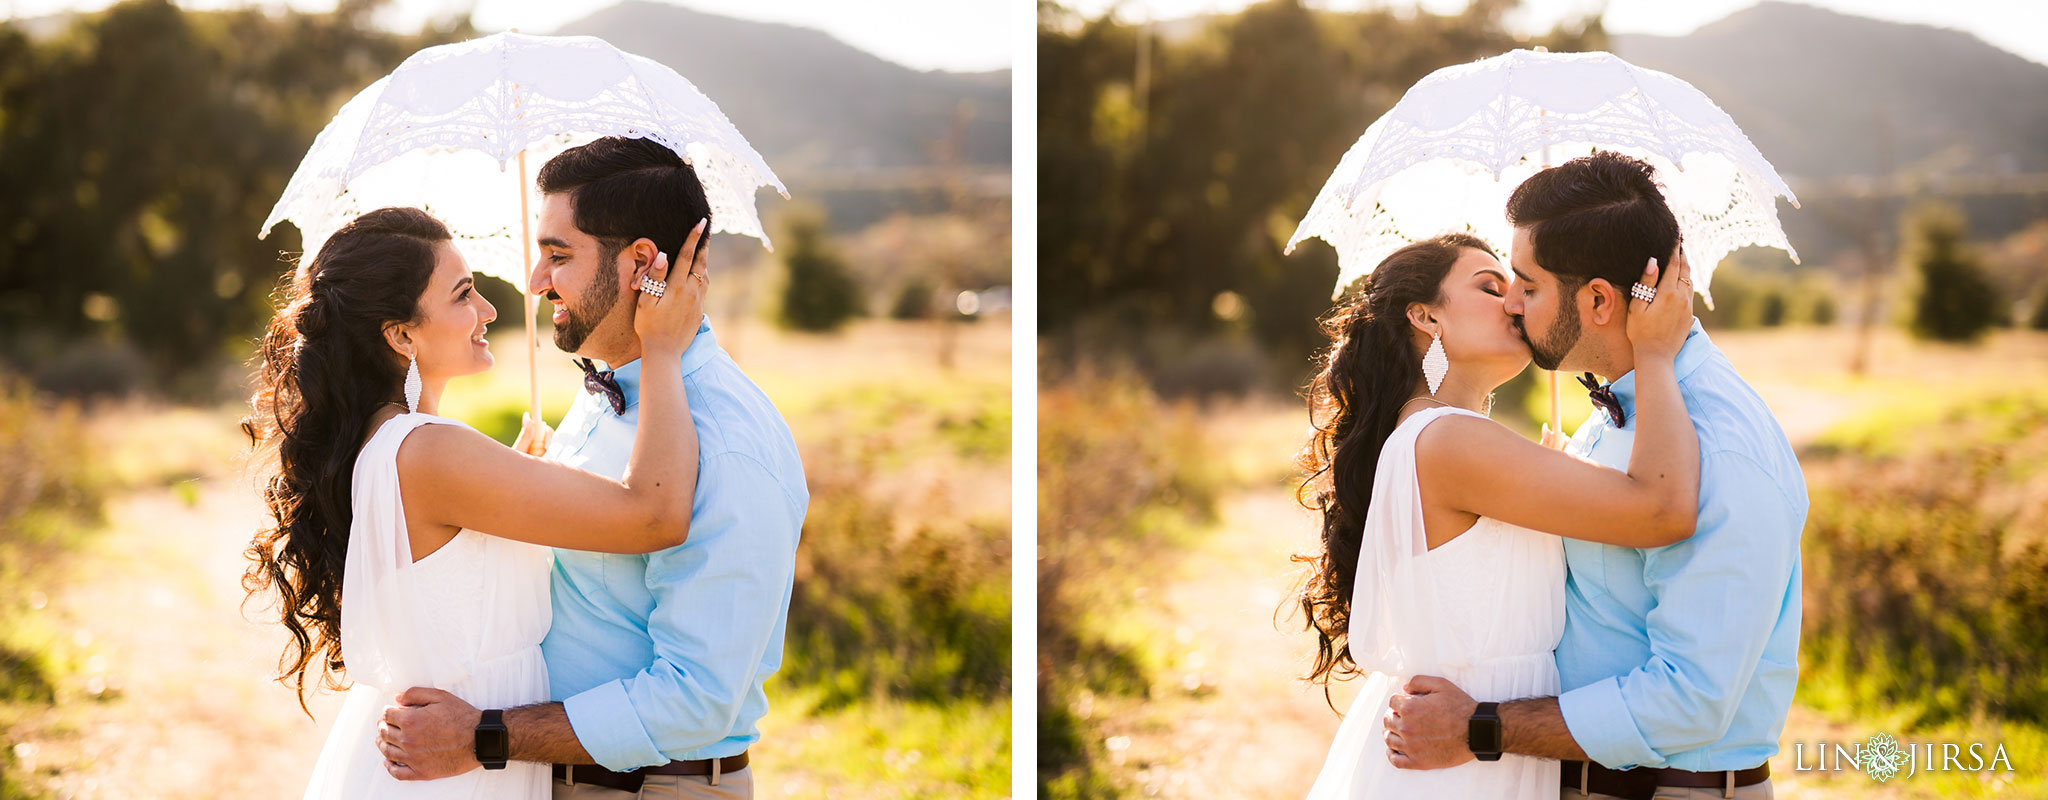 06 james dilley preserve orange county engagement photography